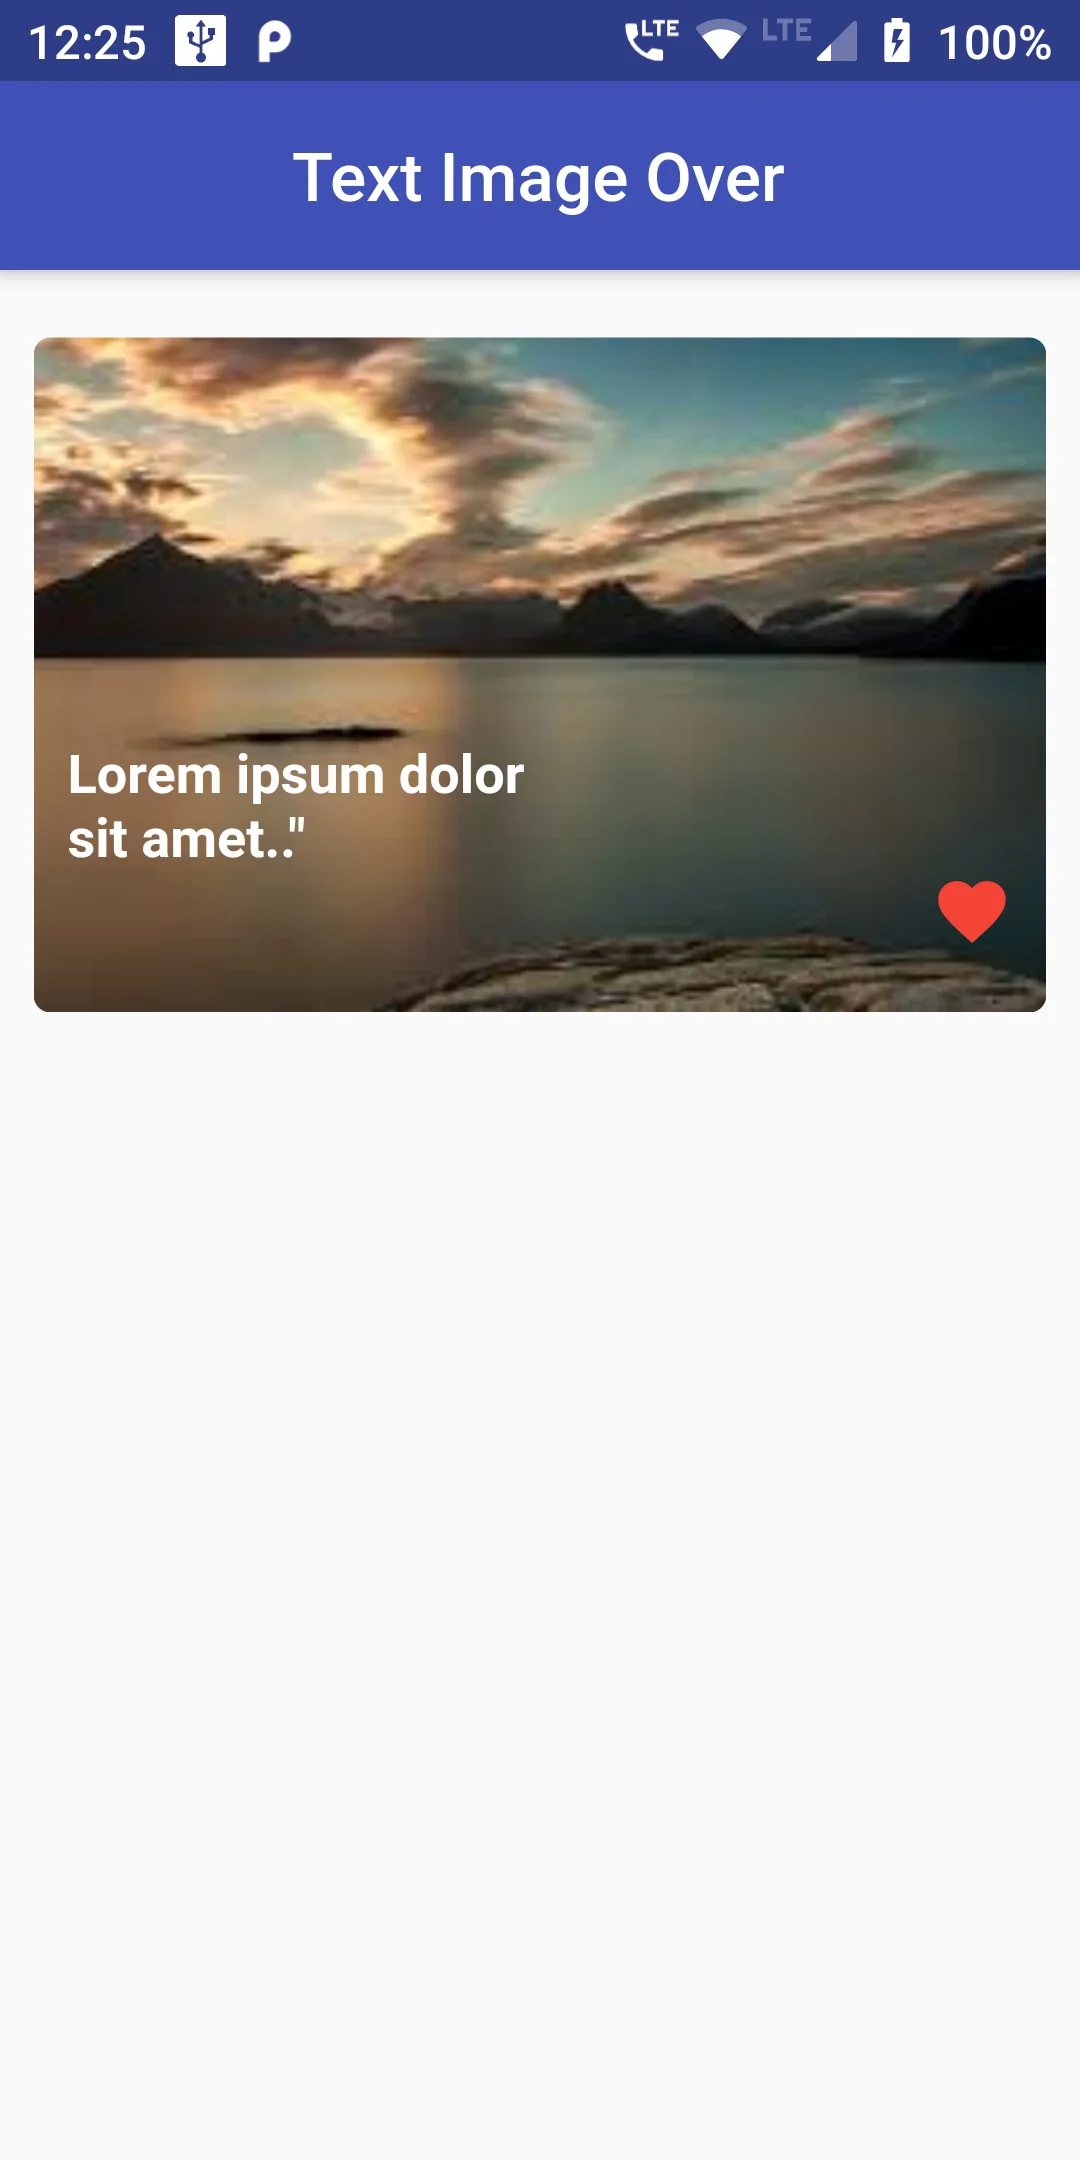 How to create text image over in flutter